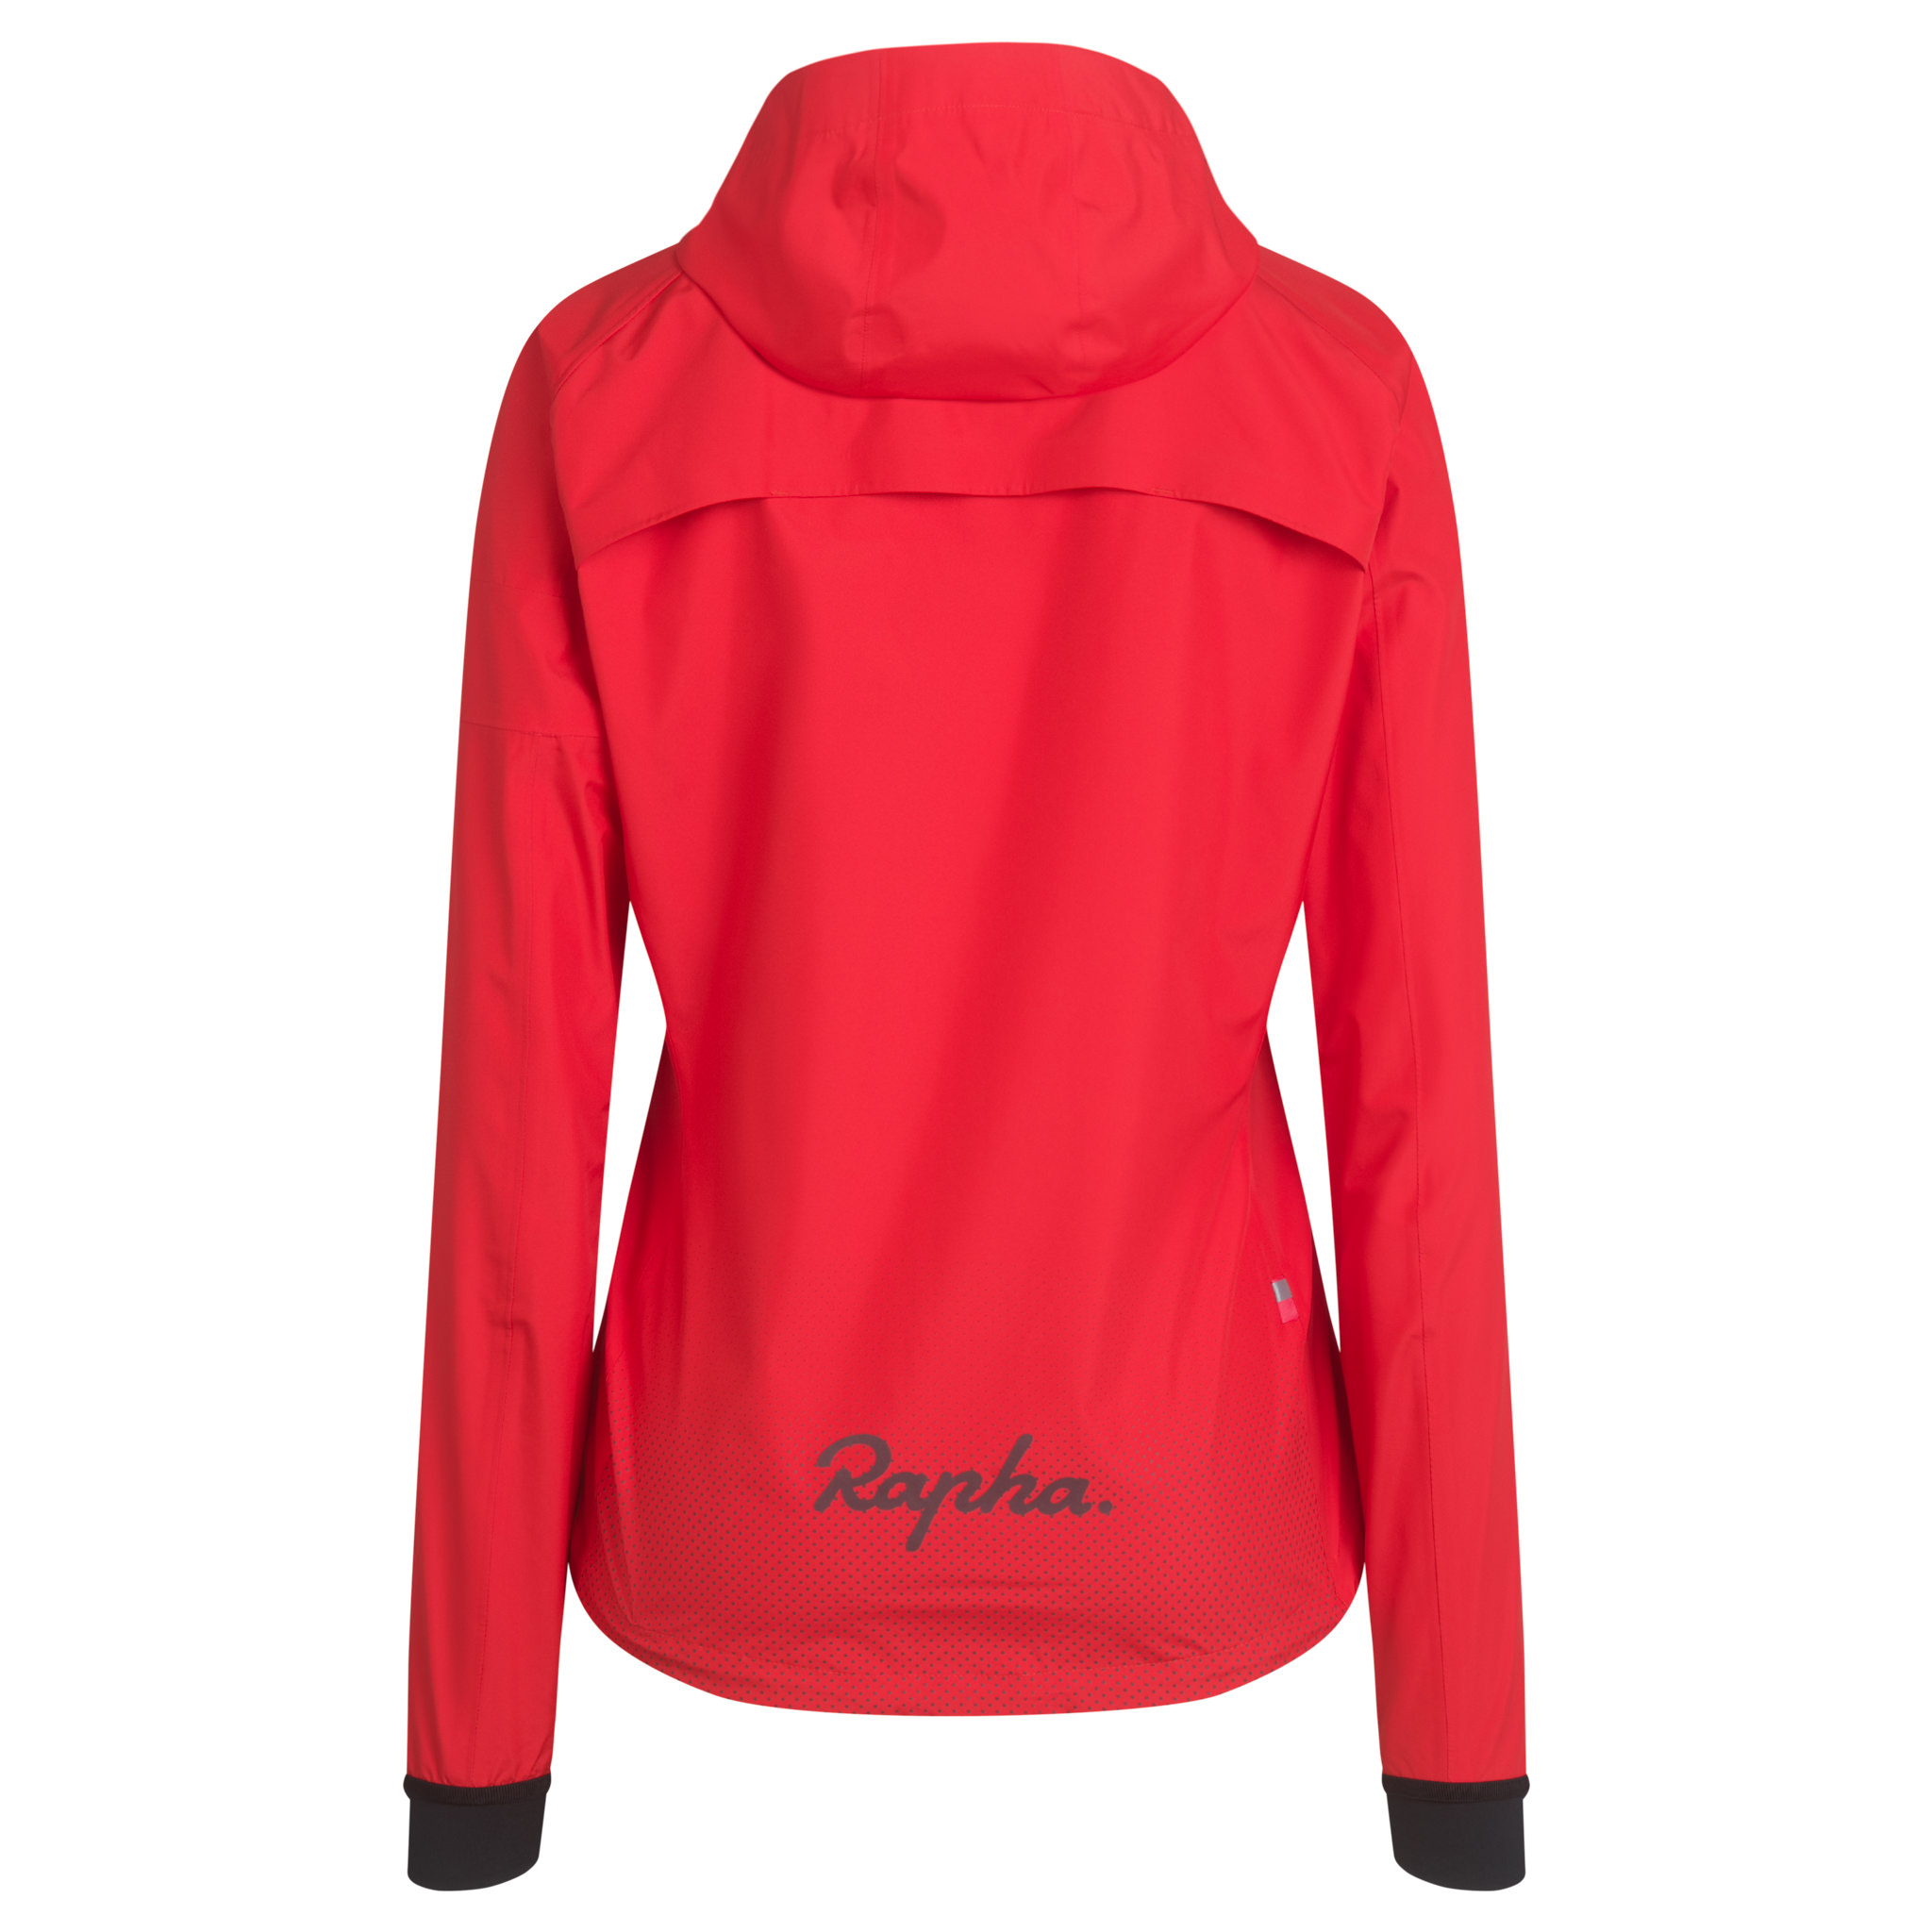 Women's Commuter Cycling Jacket - City Collection | Rapha